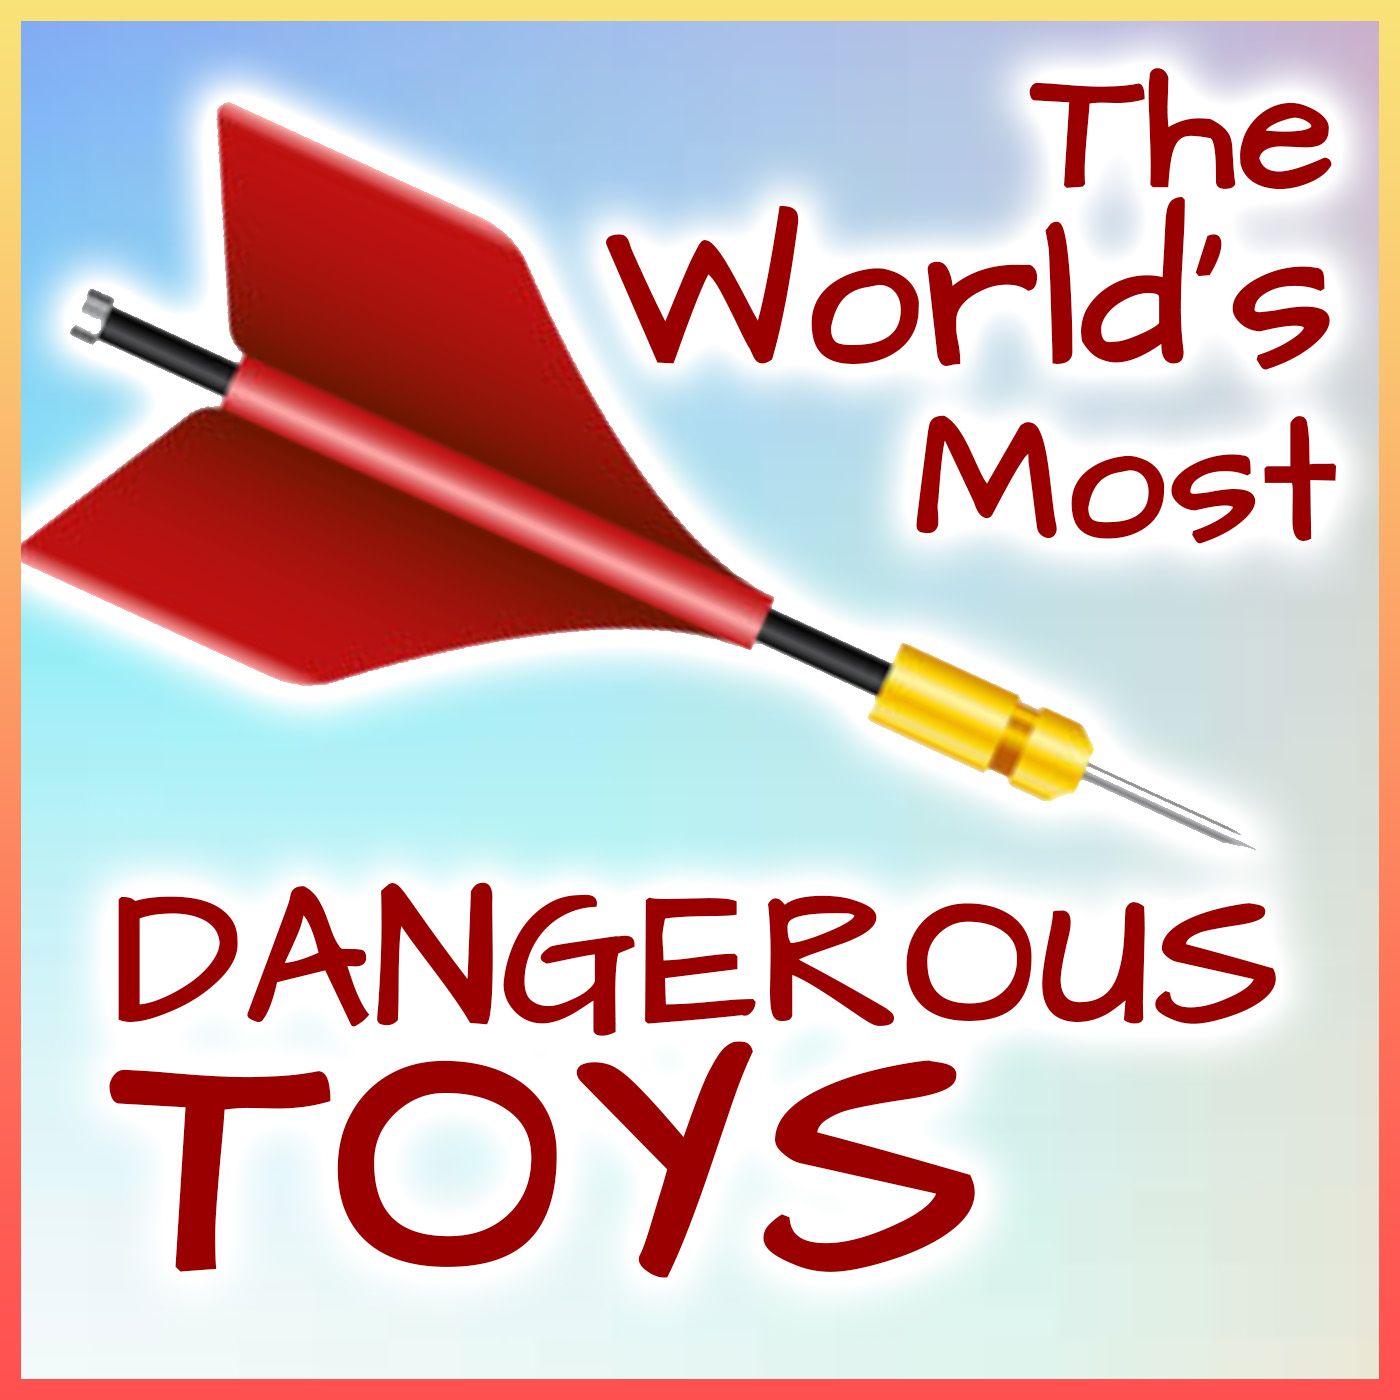 The World’s Most Dangerous Toys